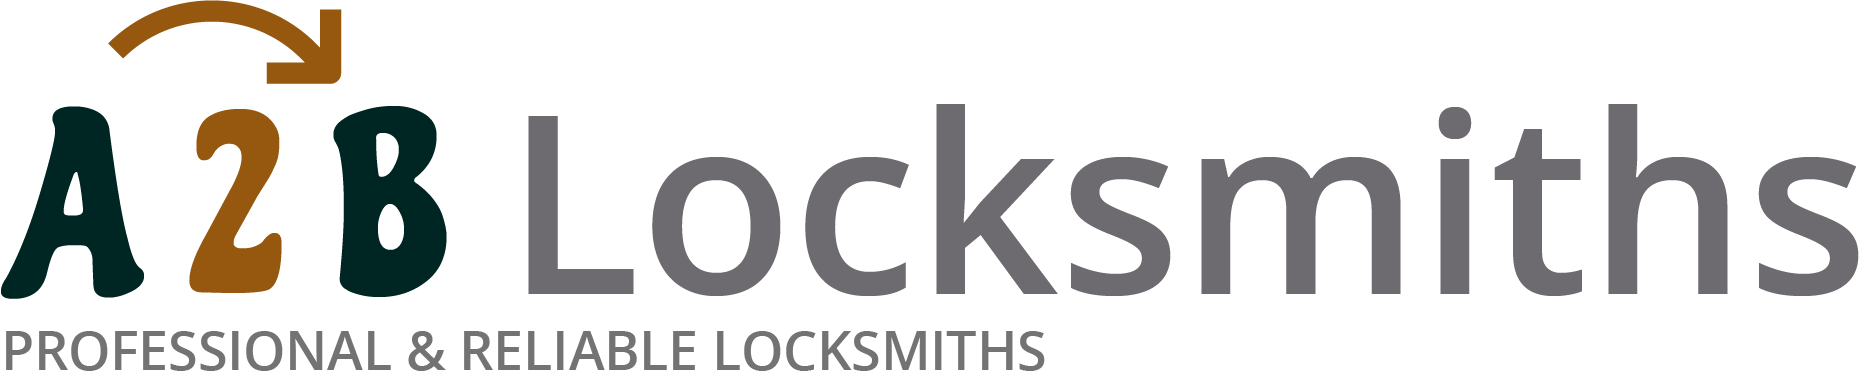 If you are locked out of house in Ashford, our 24/7 local emergency locksmith services can help you.